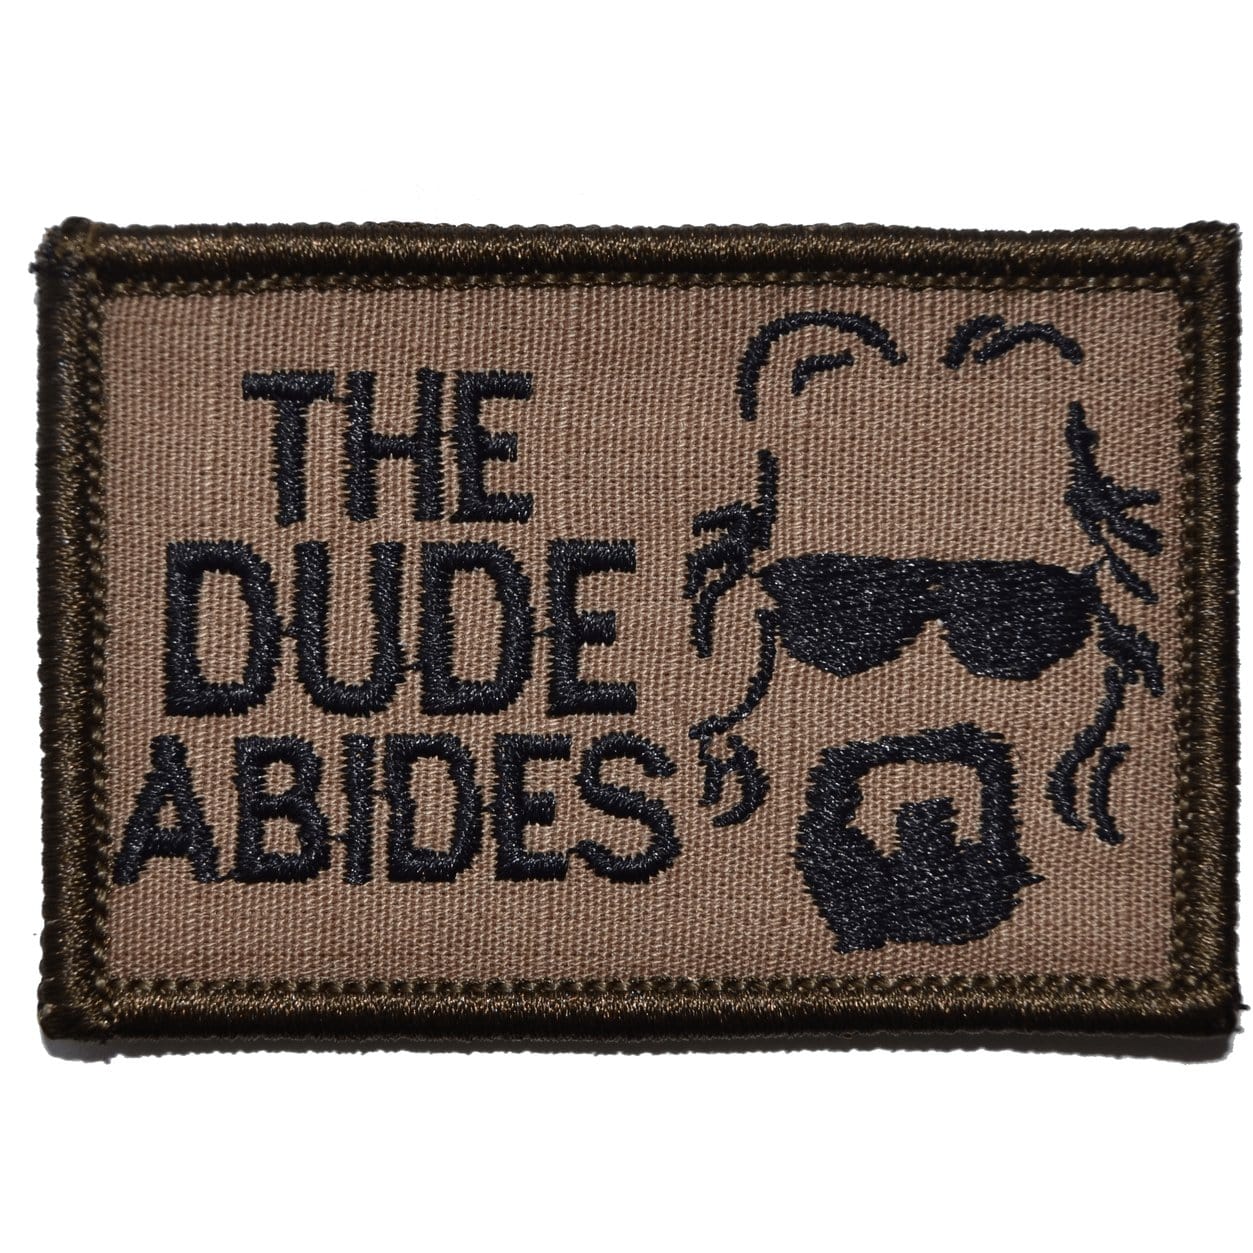 Tactical Gear Junkie Patches Coyote Brown w/ Black The Dude Abides, The Big Lebowski - 2x3 Patch